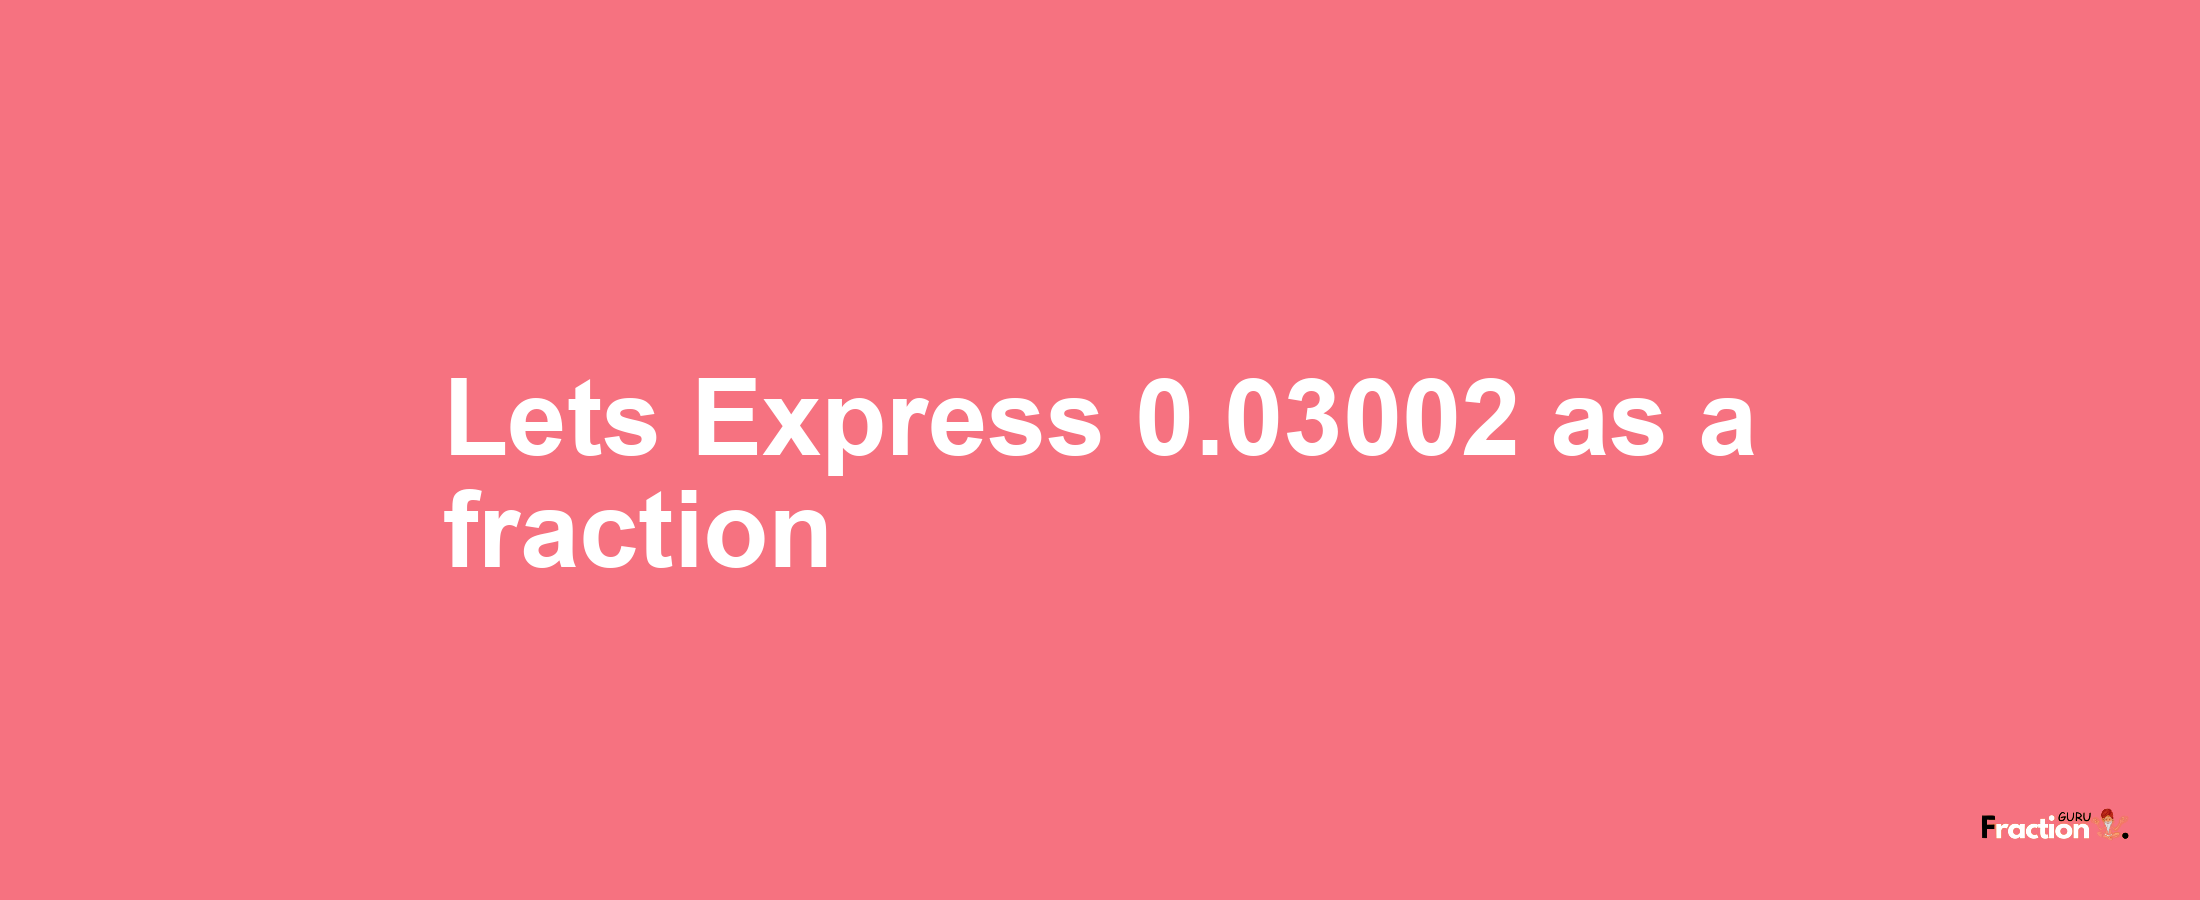 Lets Express 0.03002 as afraction